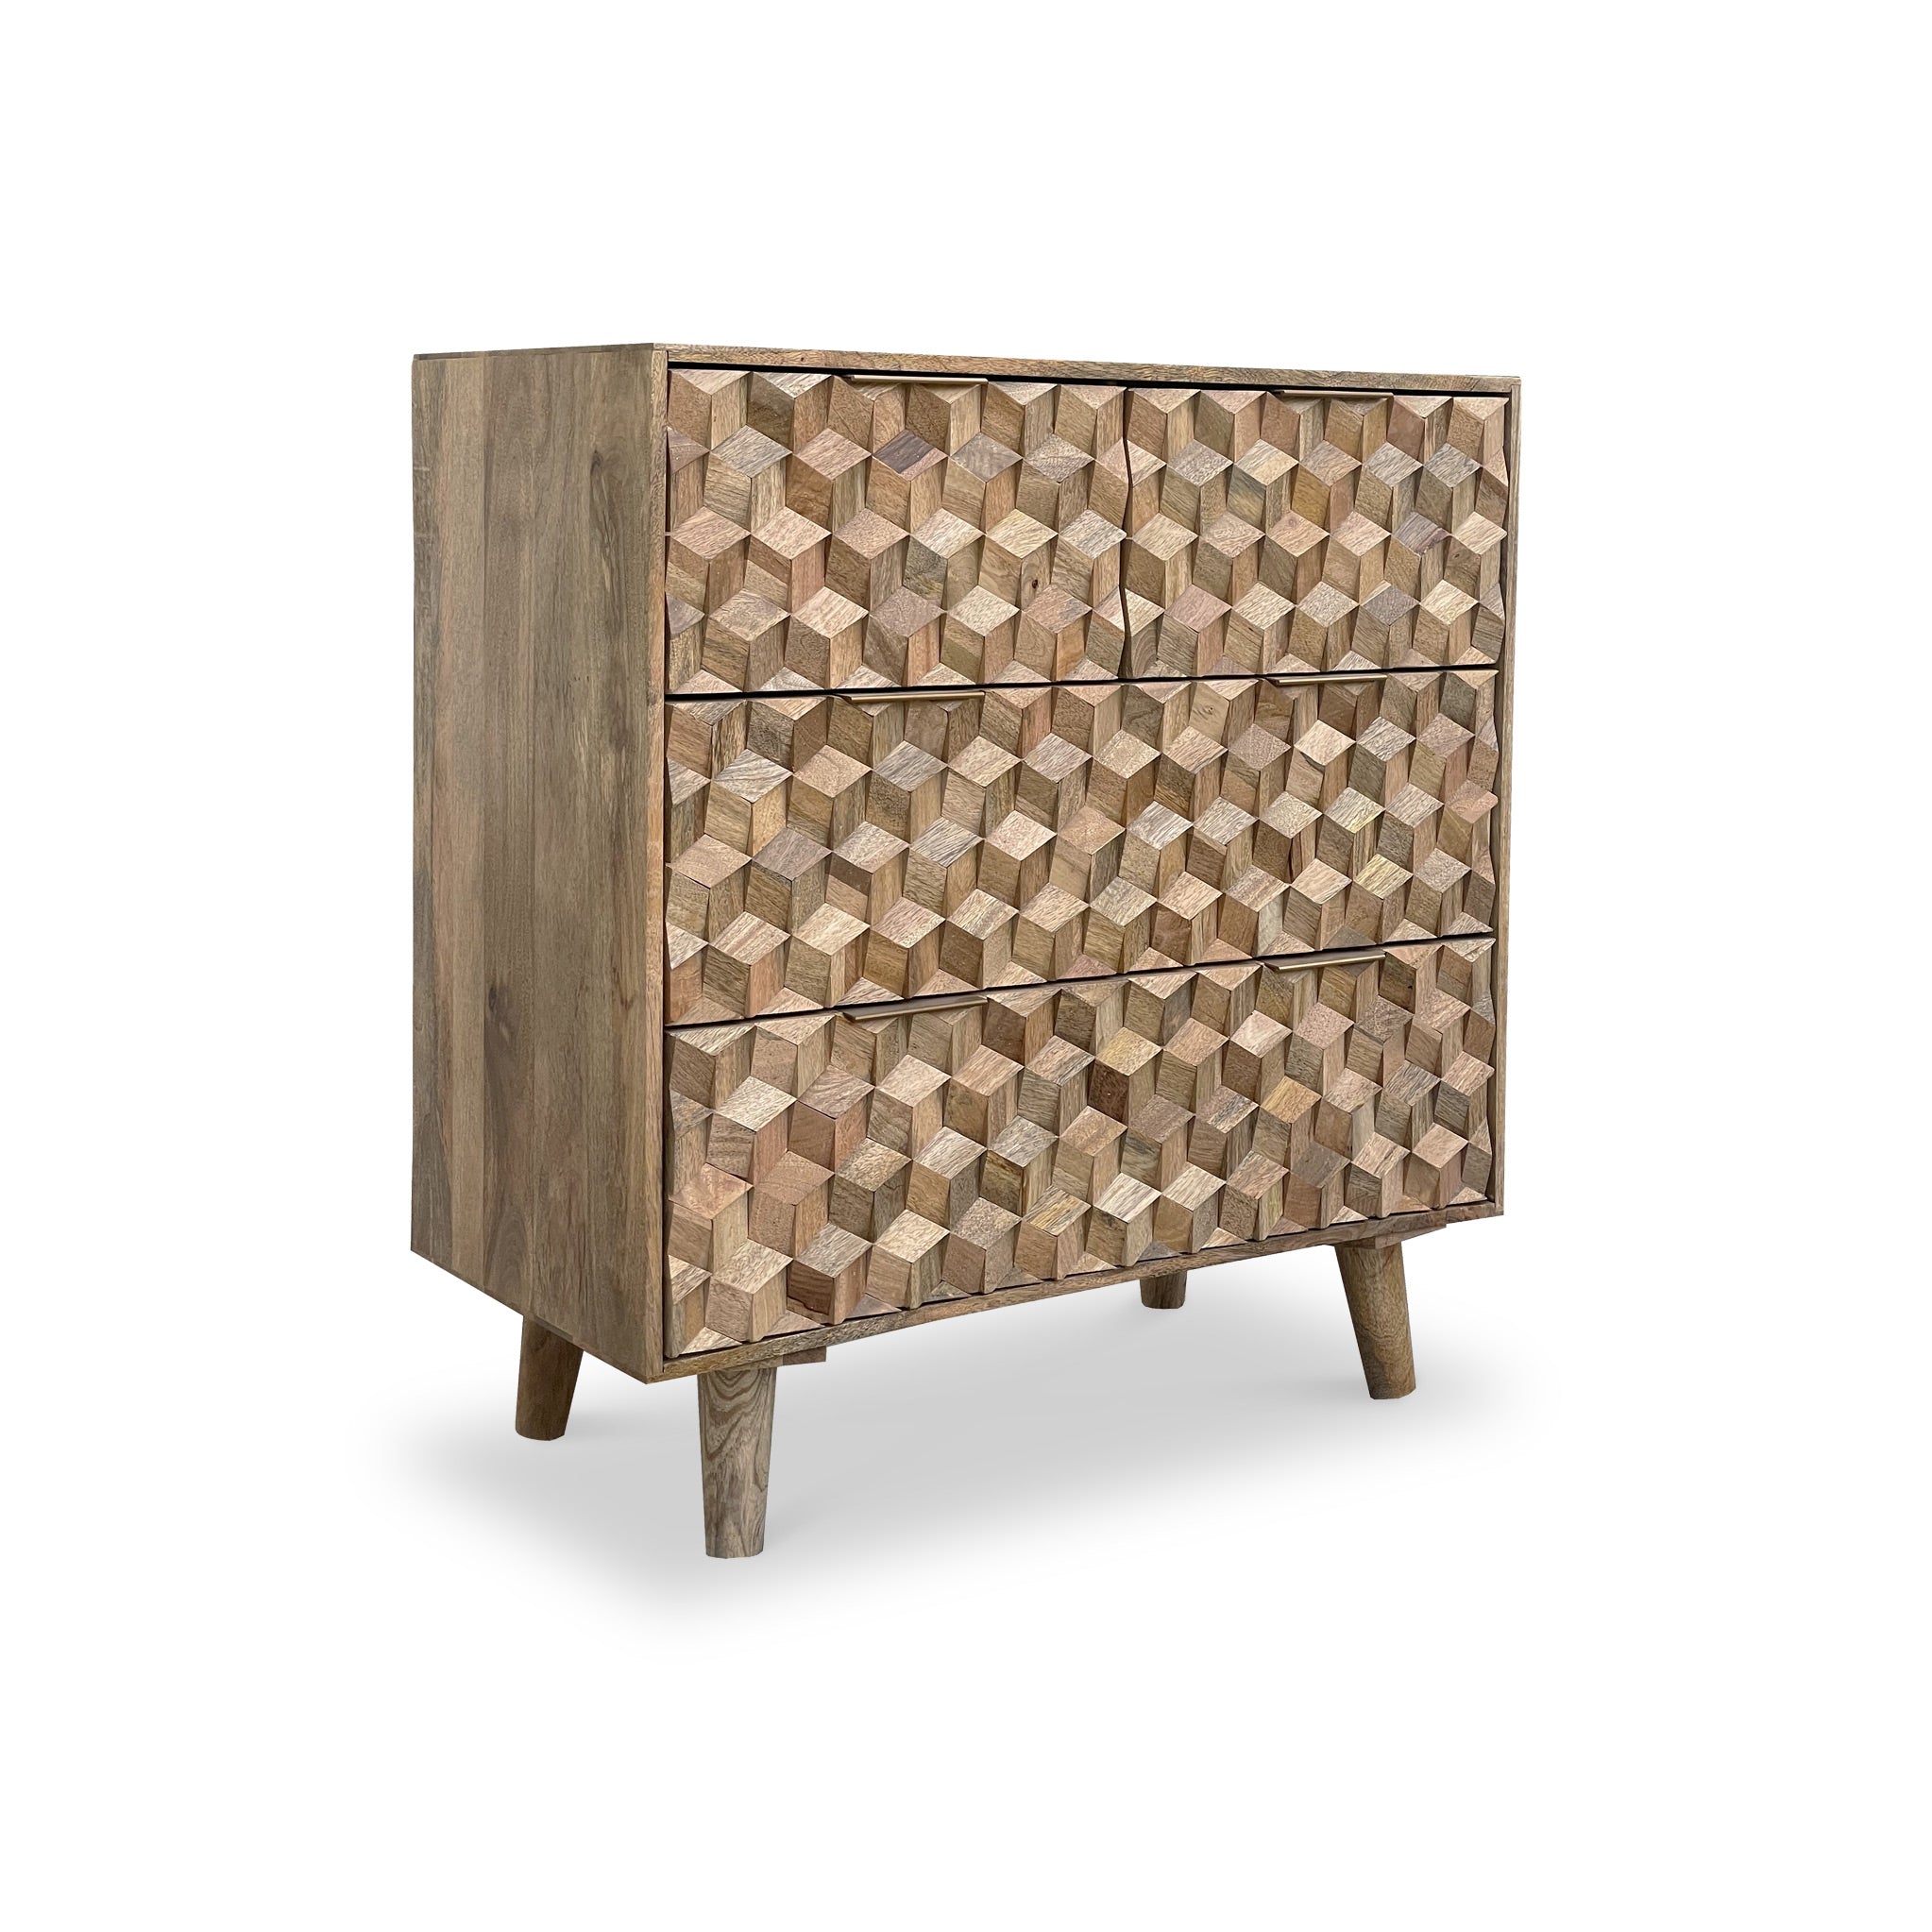 Enzo 3d Geometric Mango Wood 4 Drawer Chest Of Drawers For Bedroom